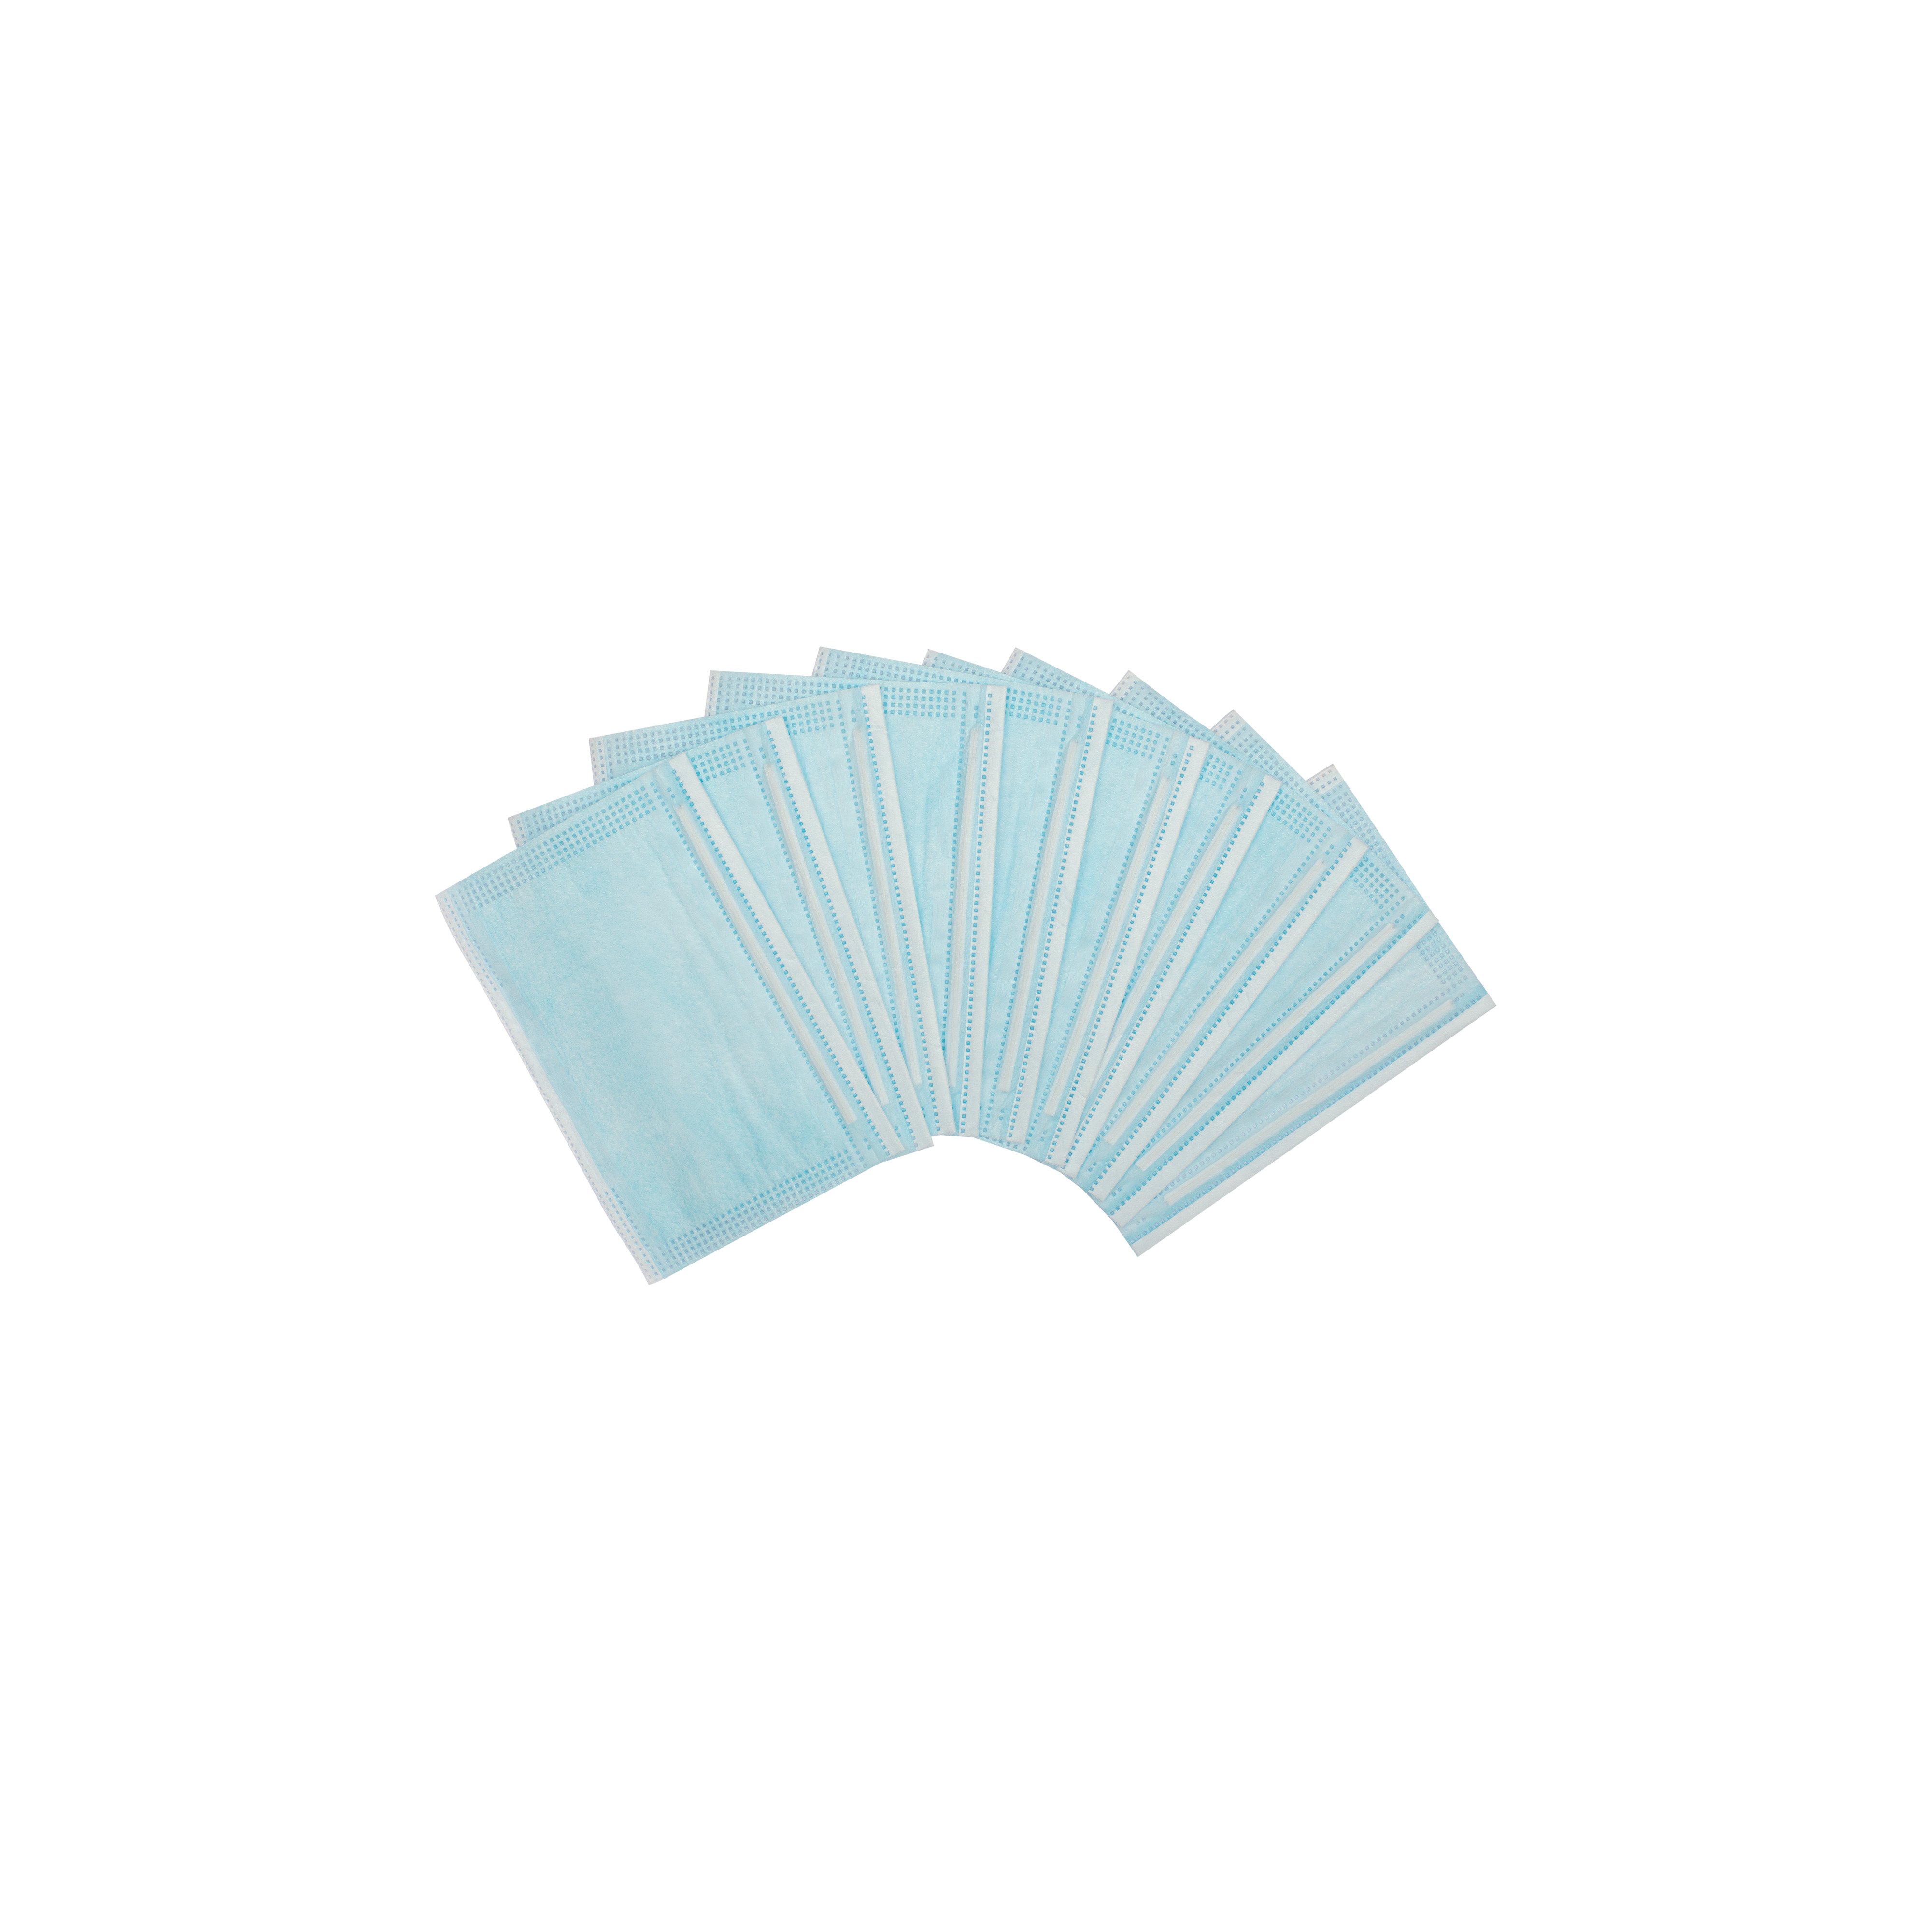 Maskfilter (Pack of 10) - white, one size thumbnail